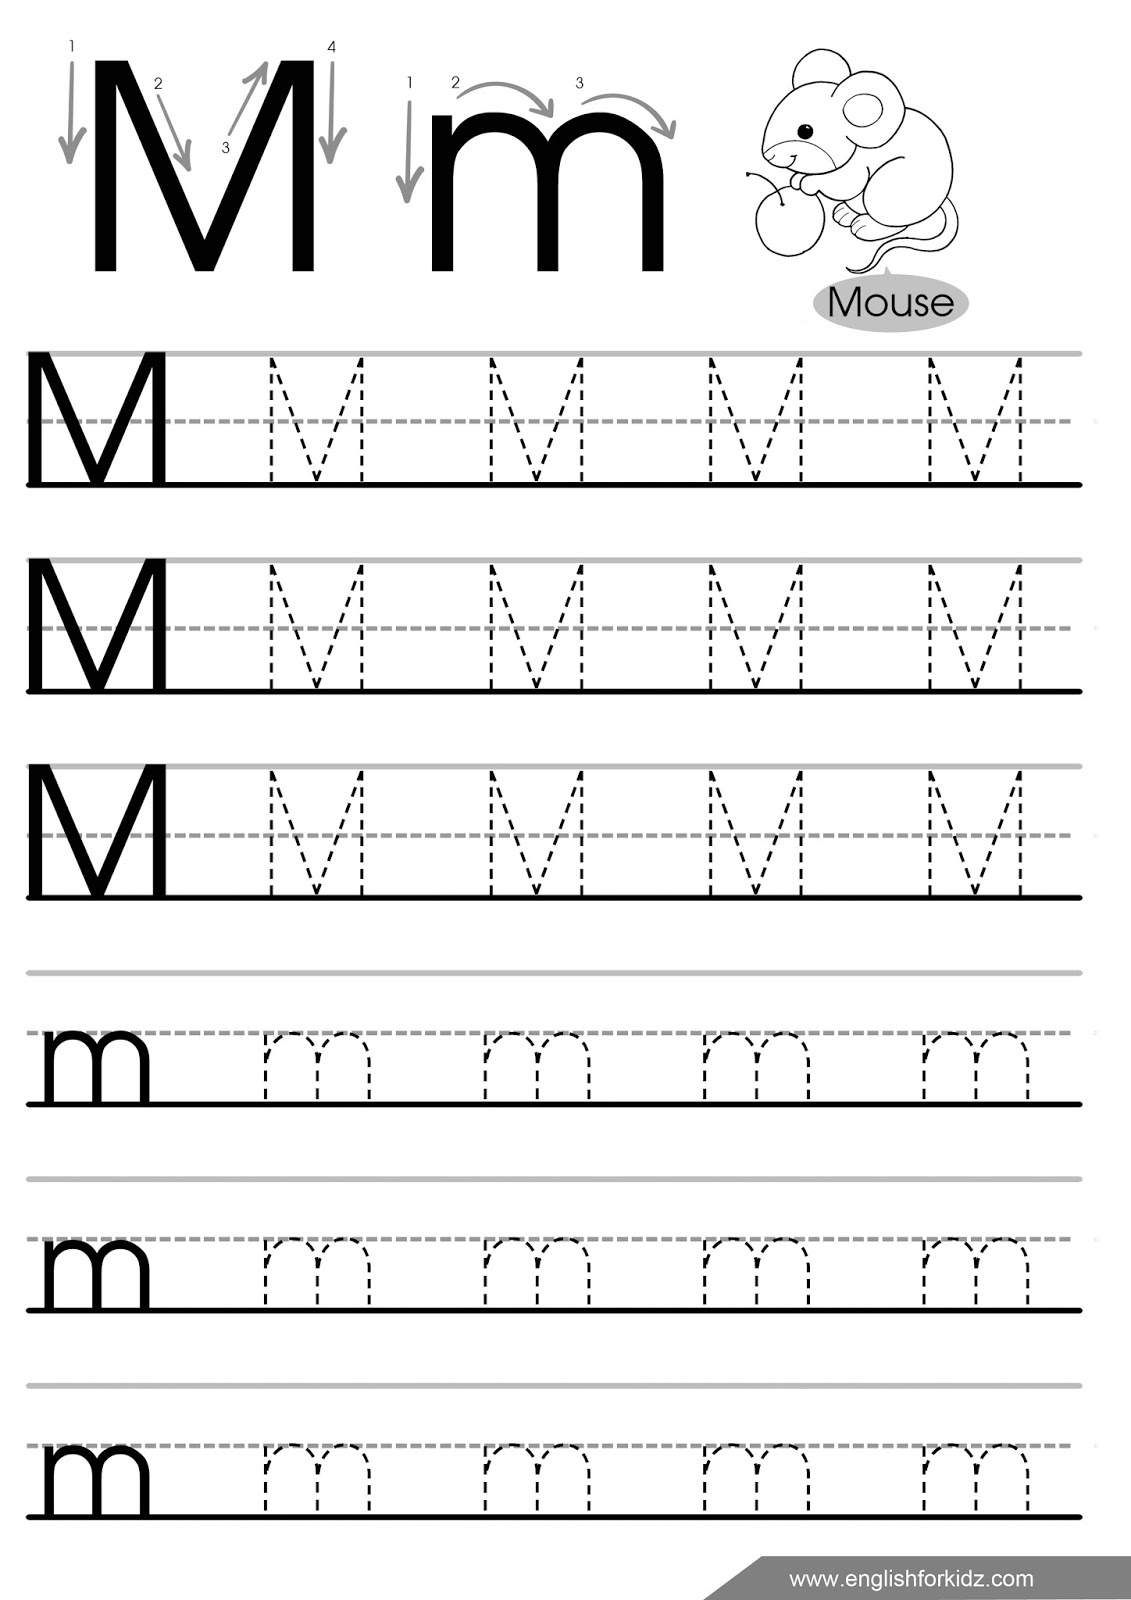 English for kids step by step letter m worksheets flash cards coloring pages